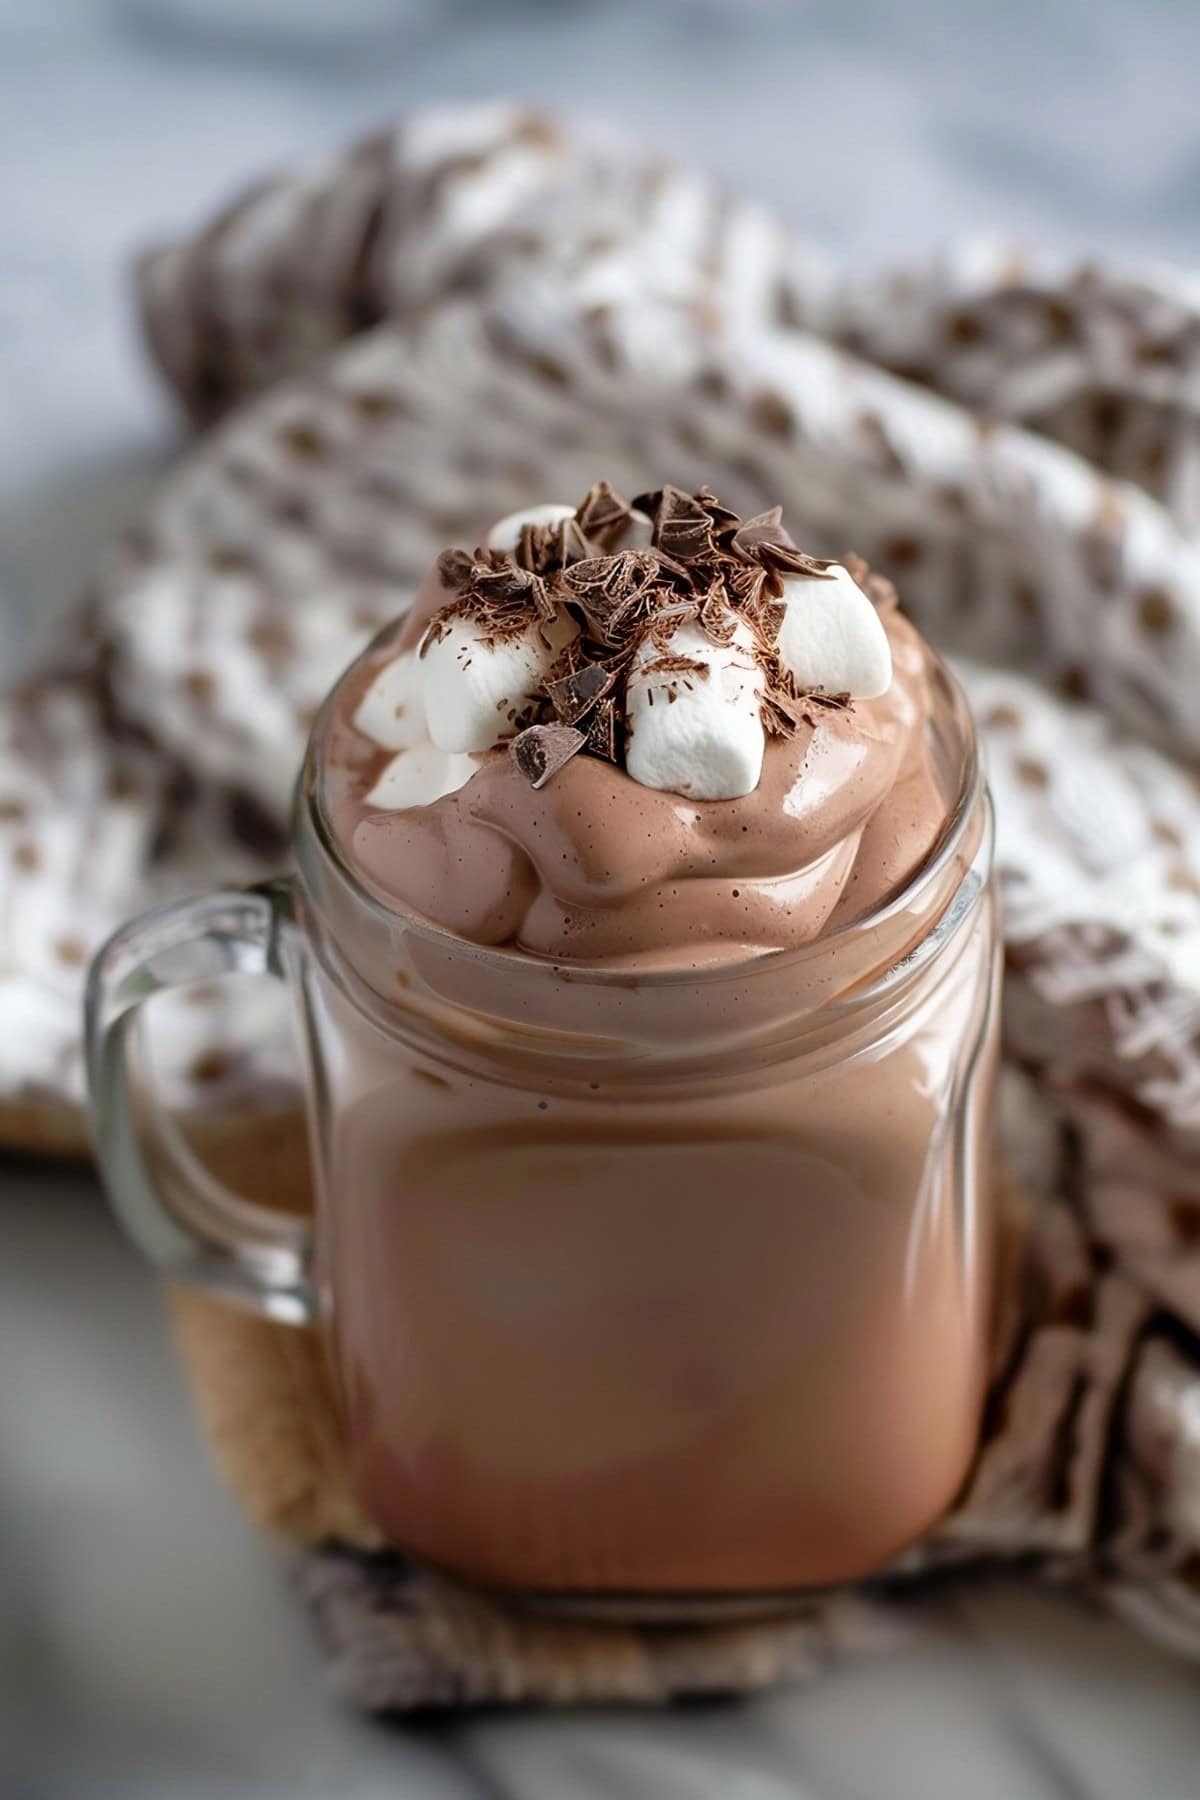 Creamy whipped hot chocolate in a mug glass topped with mini marshmallows and chocolate shavings